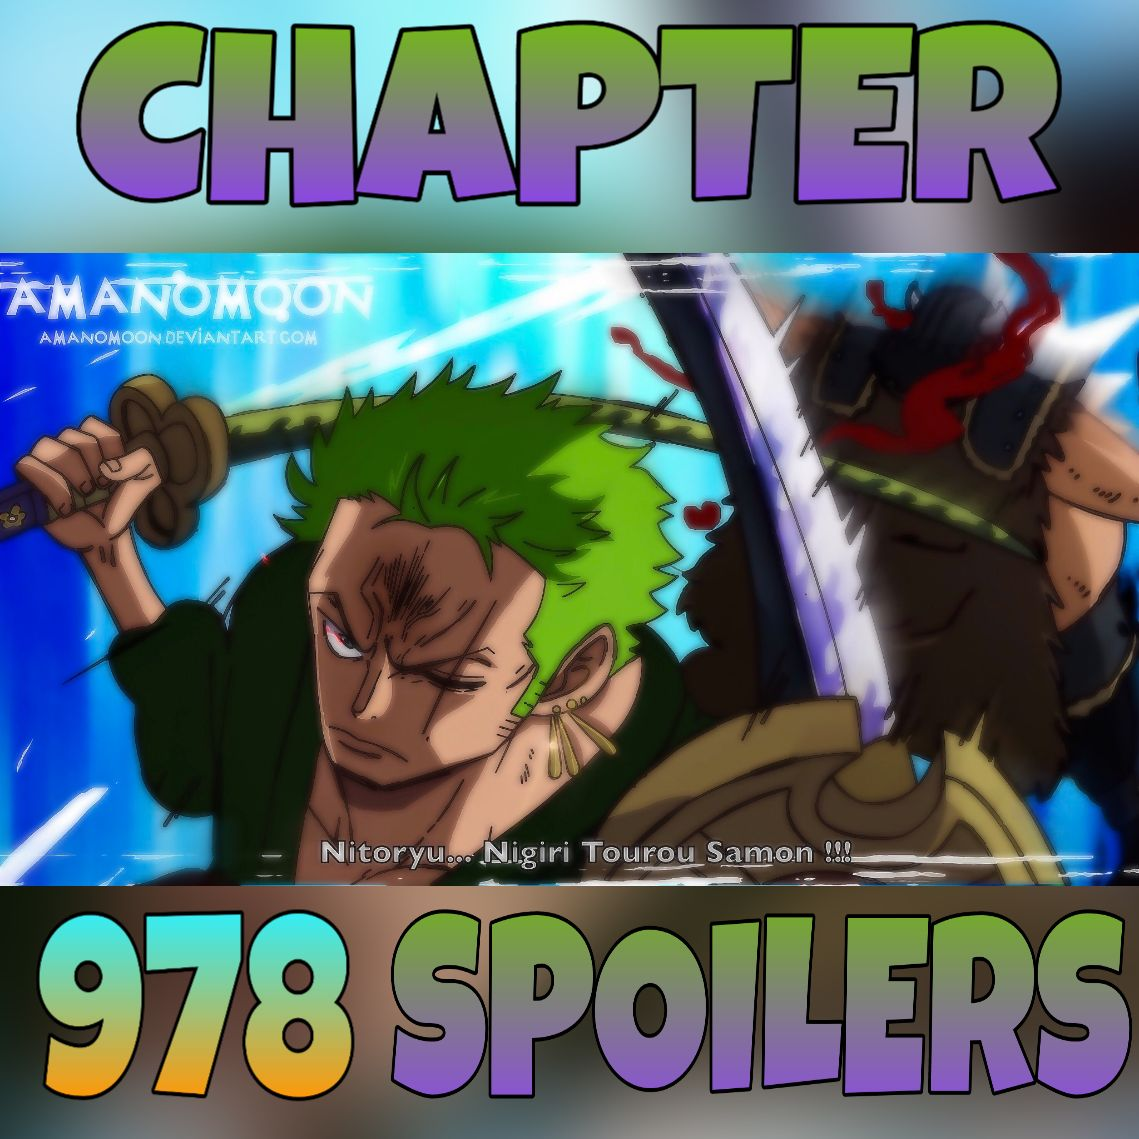 One Piece Chapter 978 Spoilers Telegraph